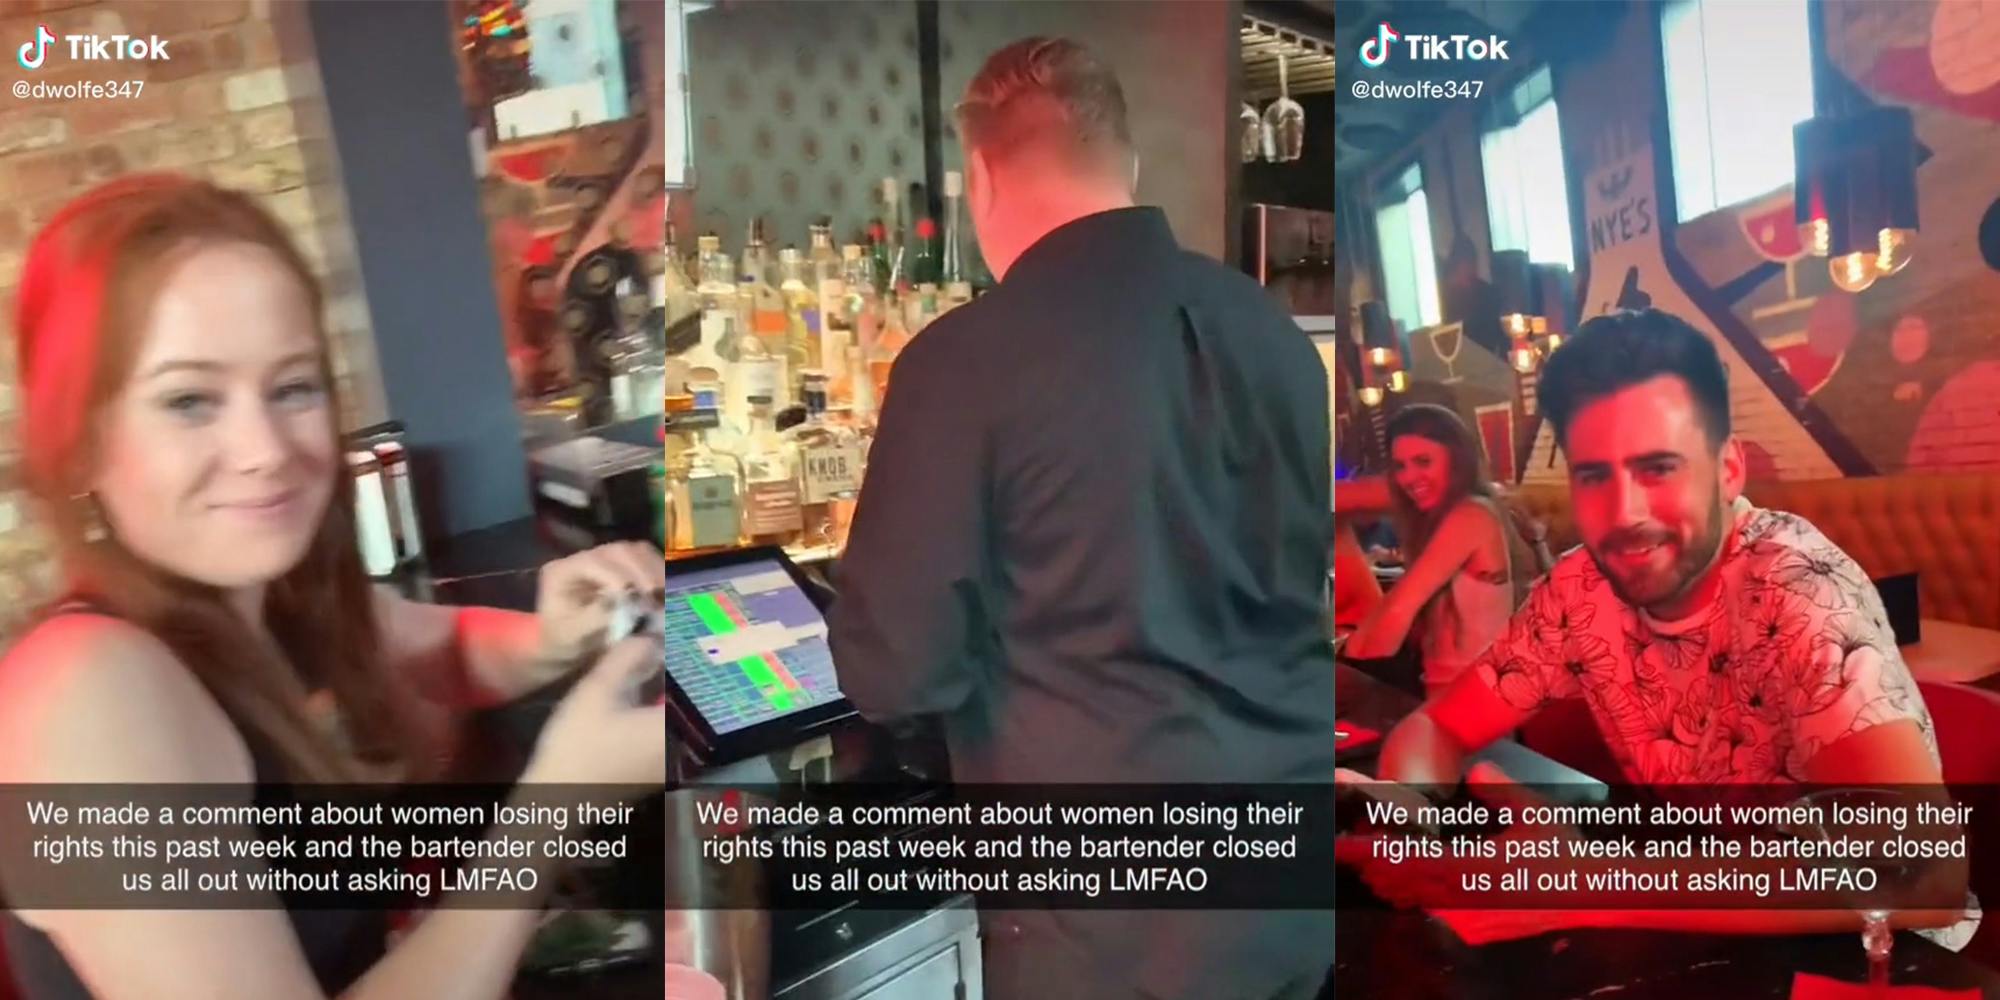 young woman at bar (l) bartender with back to bar (c) man at bar (r) all with caption 'We made a comment about women losing their rights this past week and the bartender closed us all out without asking LMFAO'